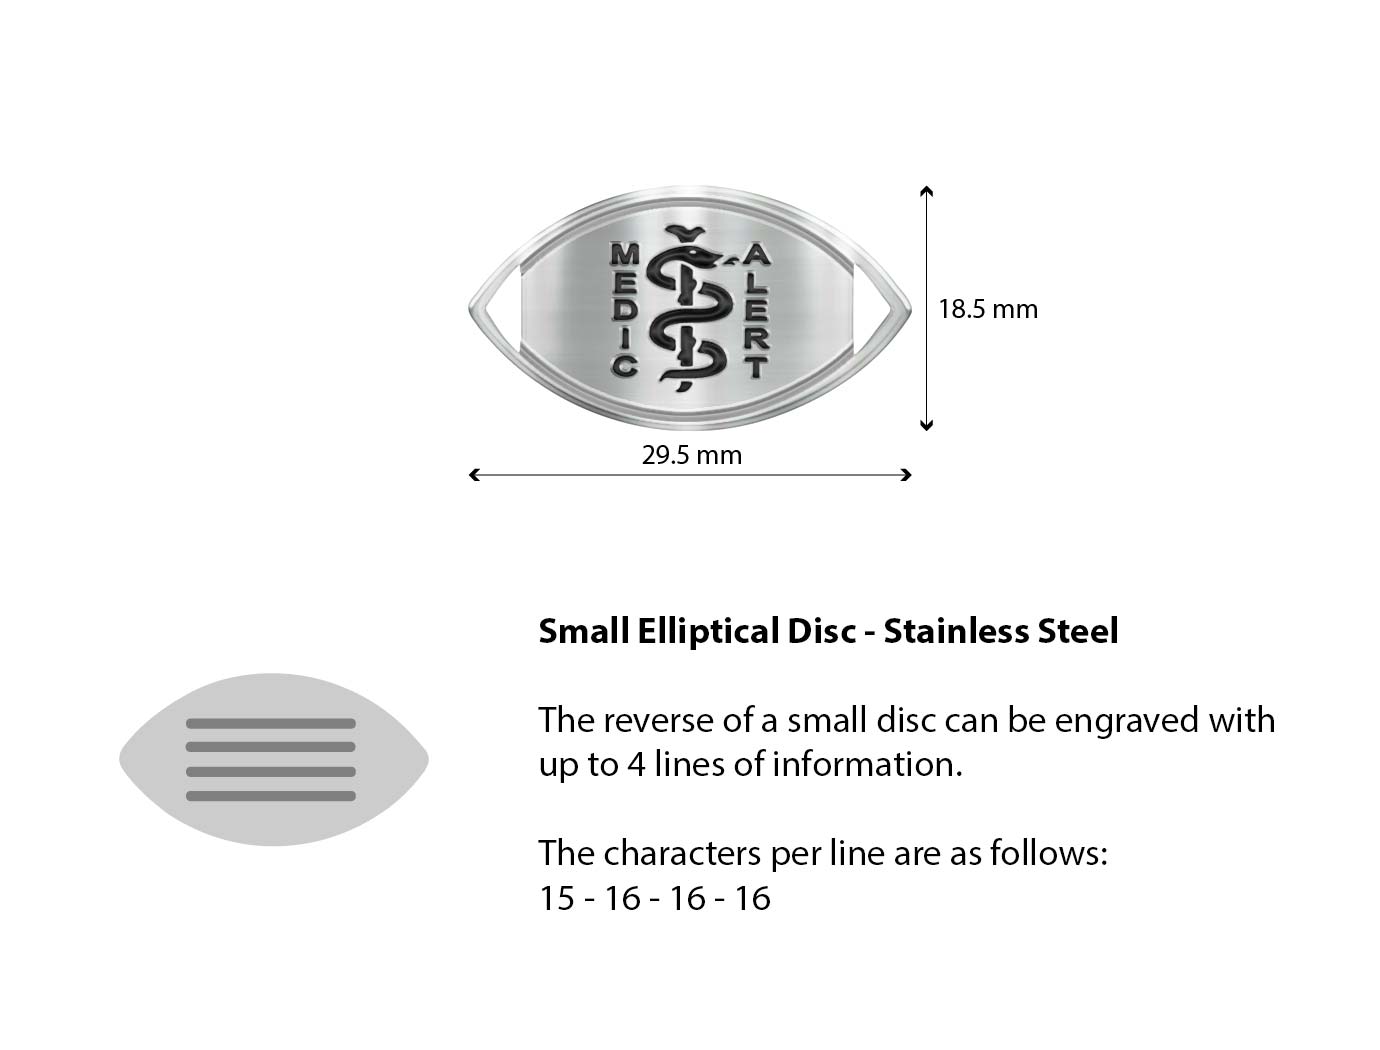 Diagram of the MedicAlert stainless steel small elliptical disc with measurements and descriptions of the engraving specifications